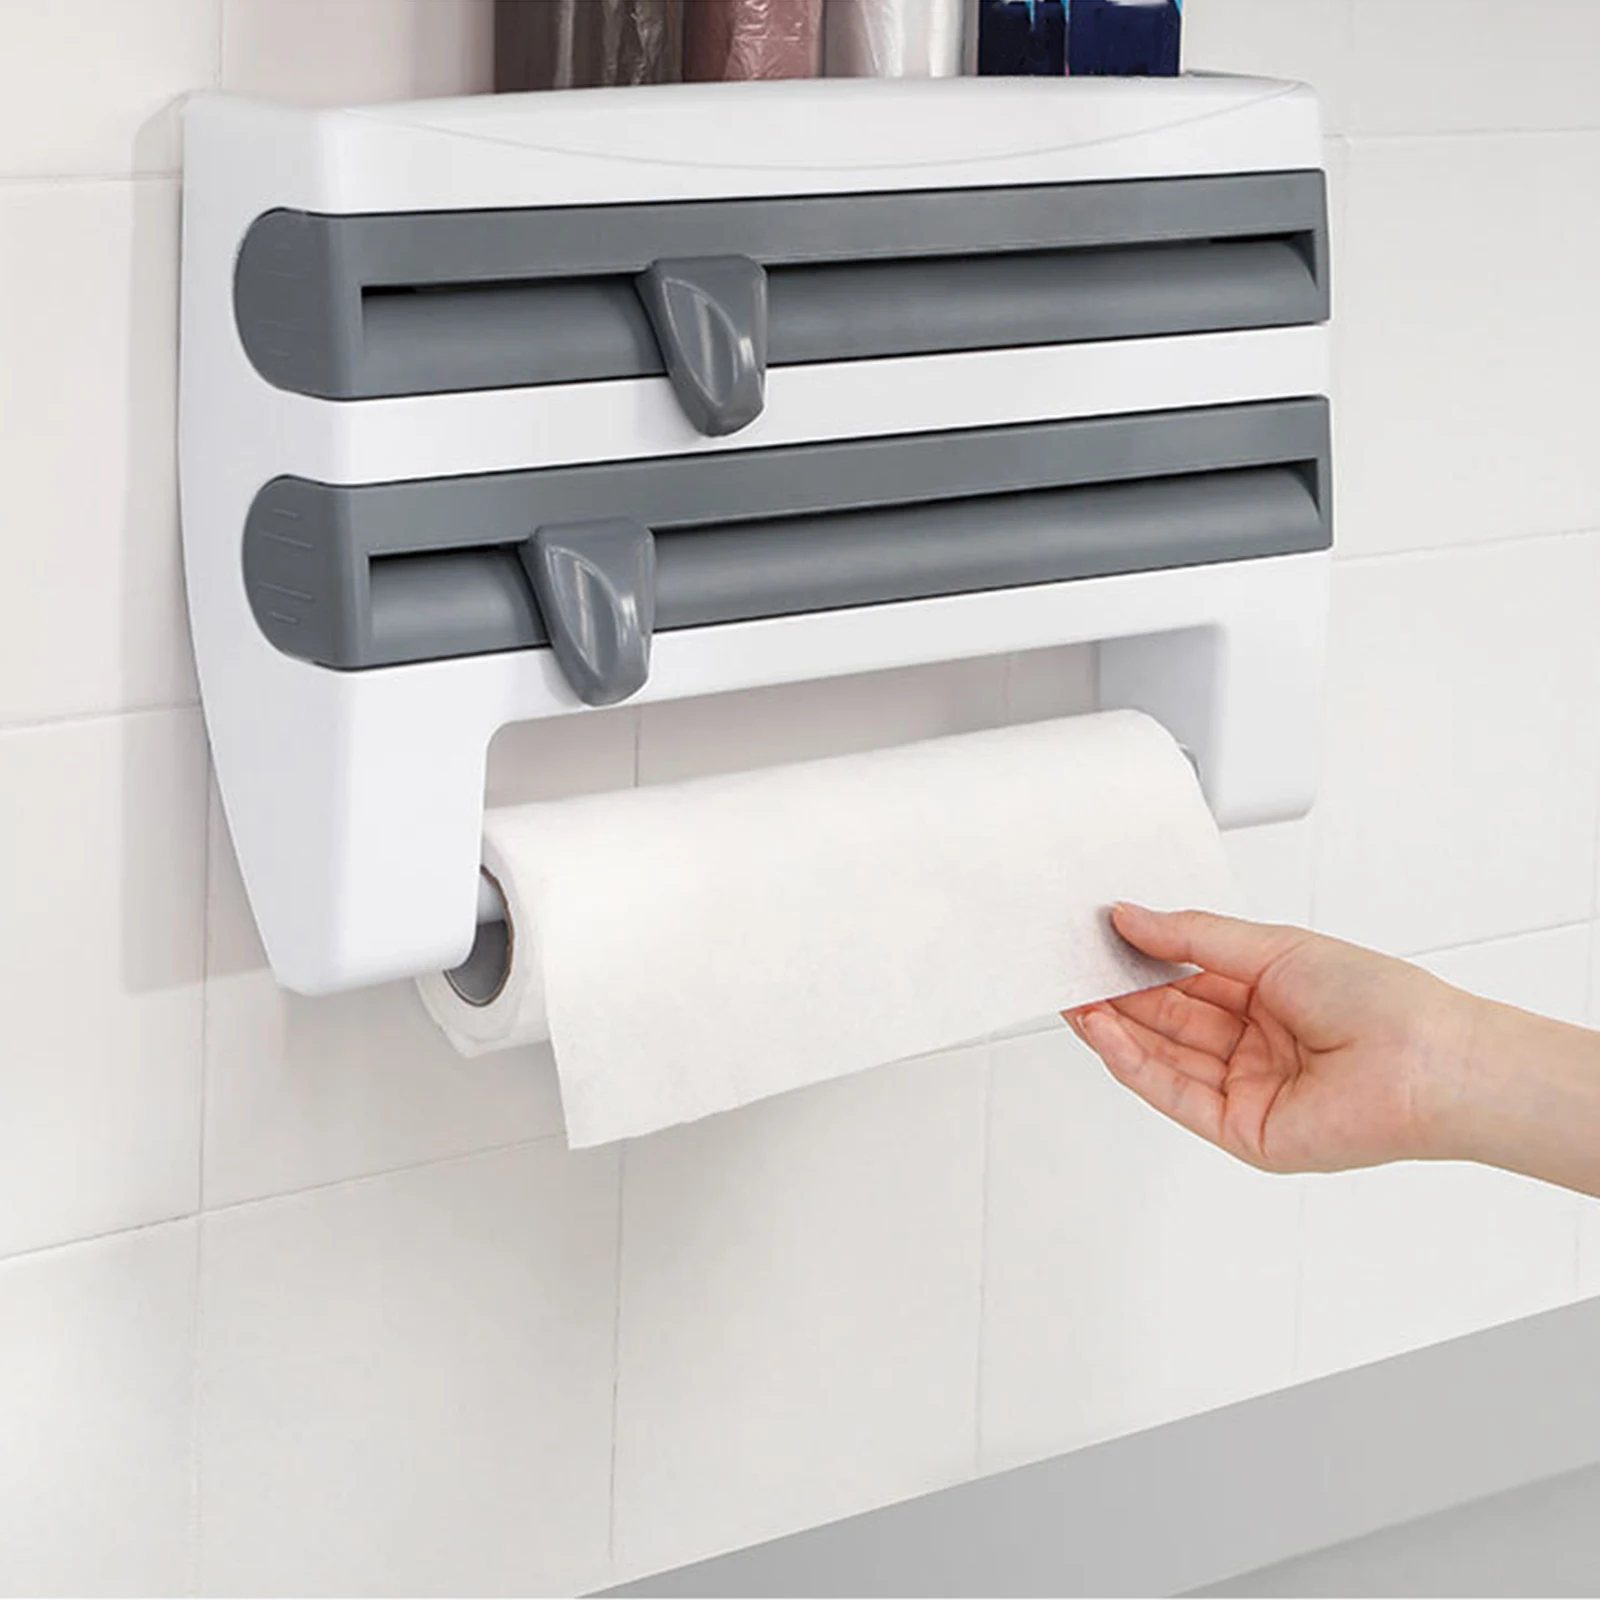 3 in 1 Foil Cling Film & Kitchen Roll Dispenser Wall Mounted Holder Rack New 